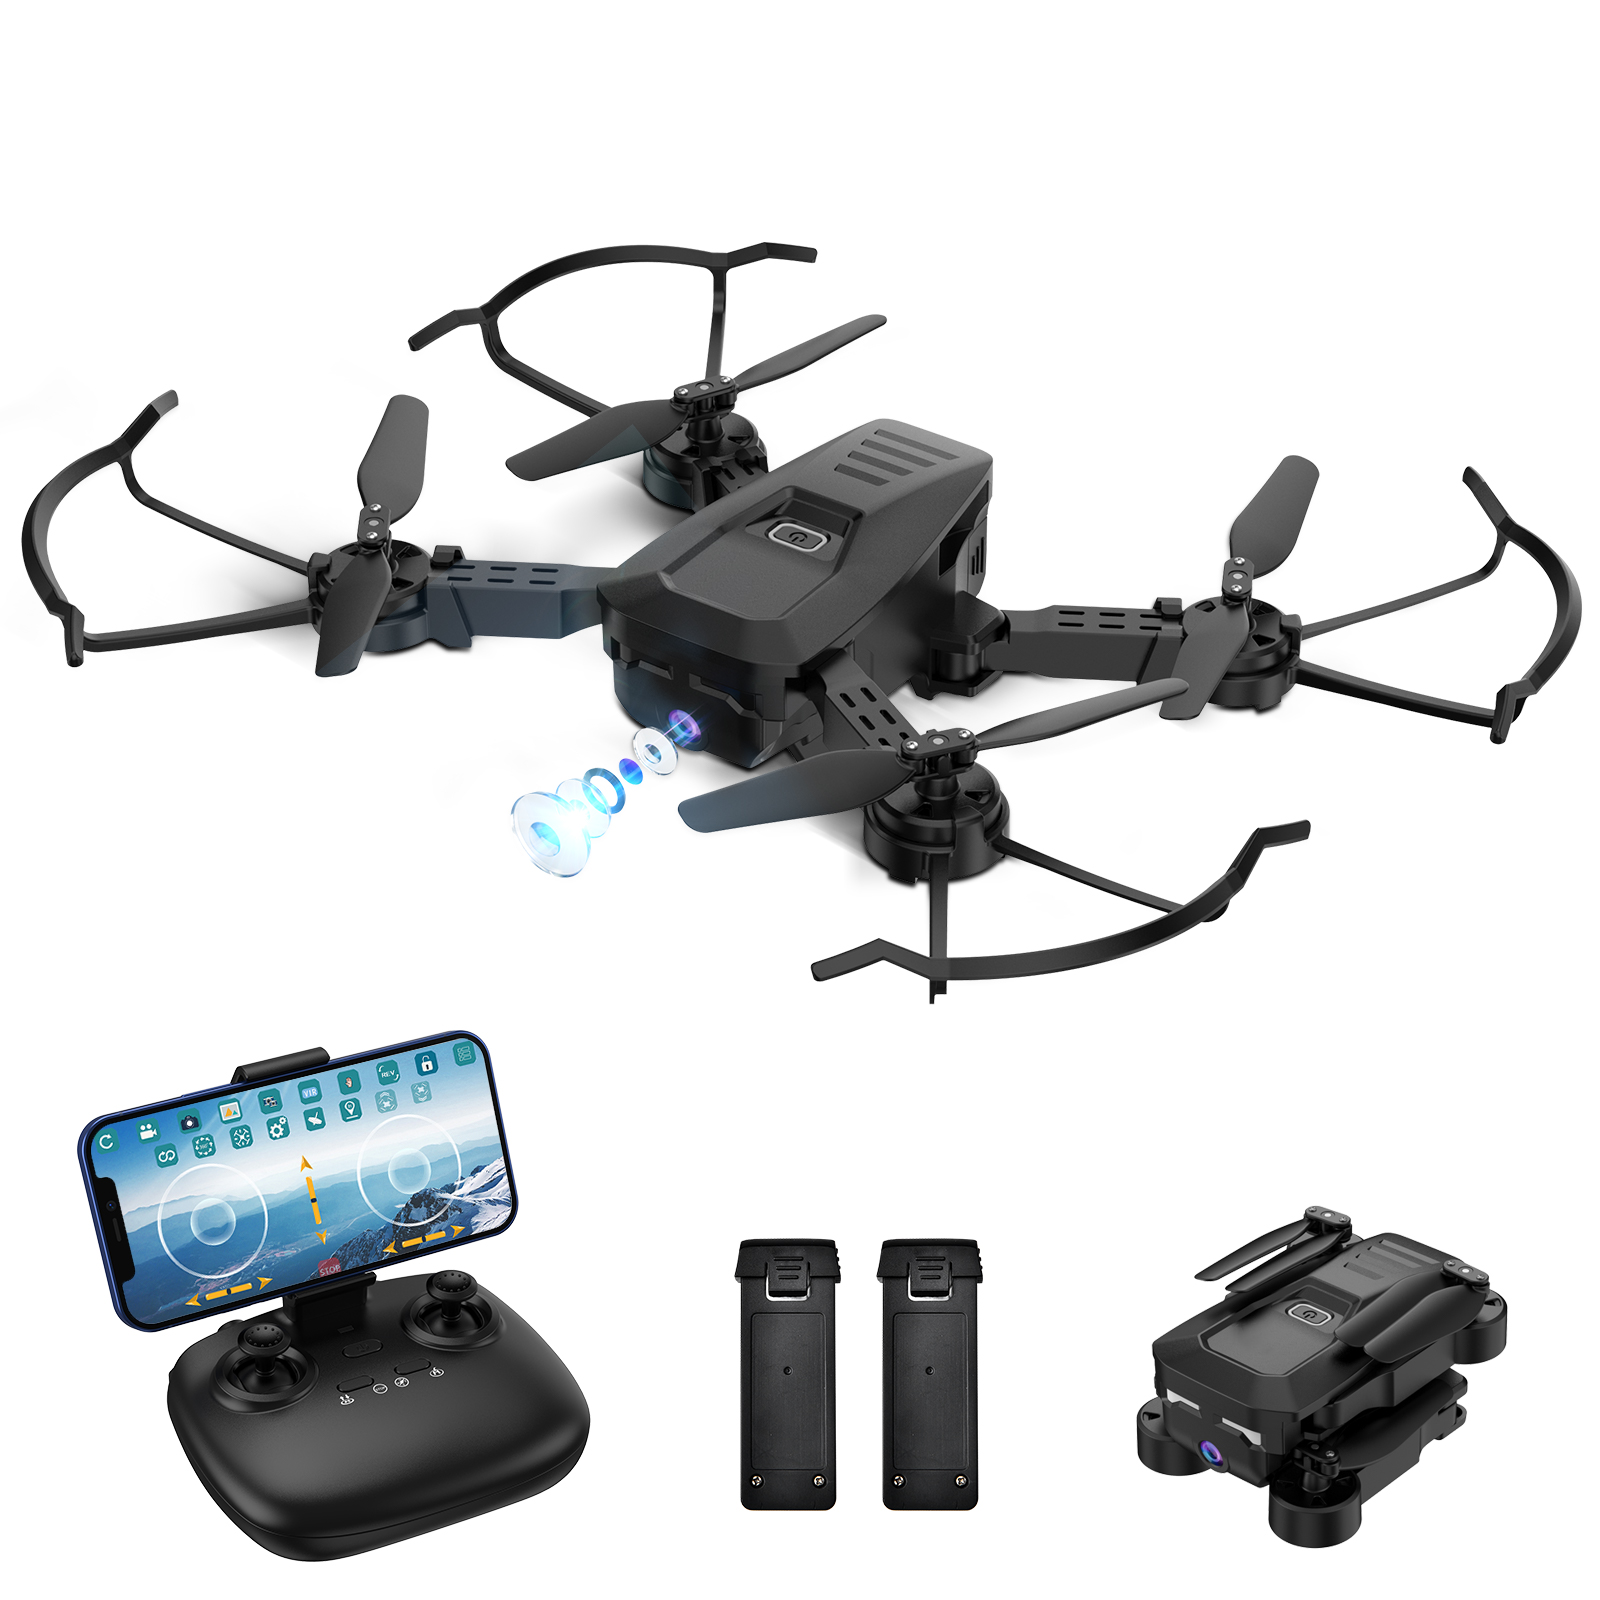 RC Quadcopter Remote Control Drone - ALLCACA RC Drone 6-axis Gyro Quadcopter Optical Flow Positioning Drone with Double 720P HD Cameras, Altitude Hold, Headless Mode and 360° Flip, Black - image 5 of 9